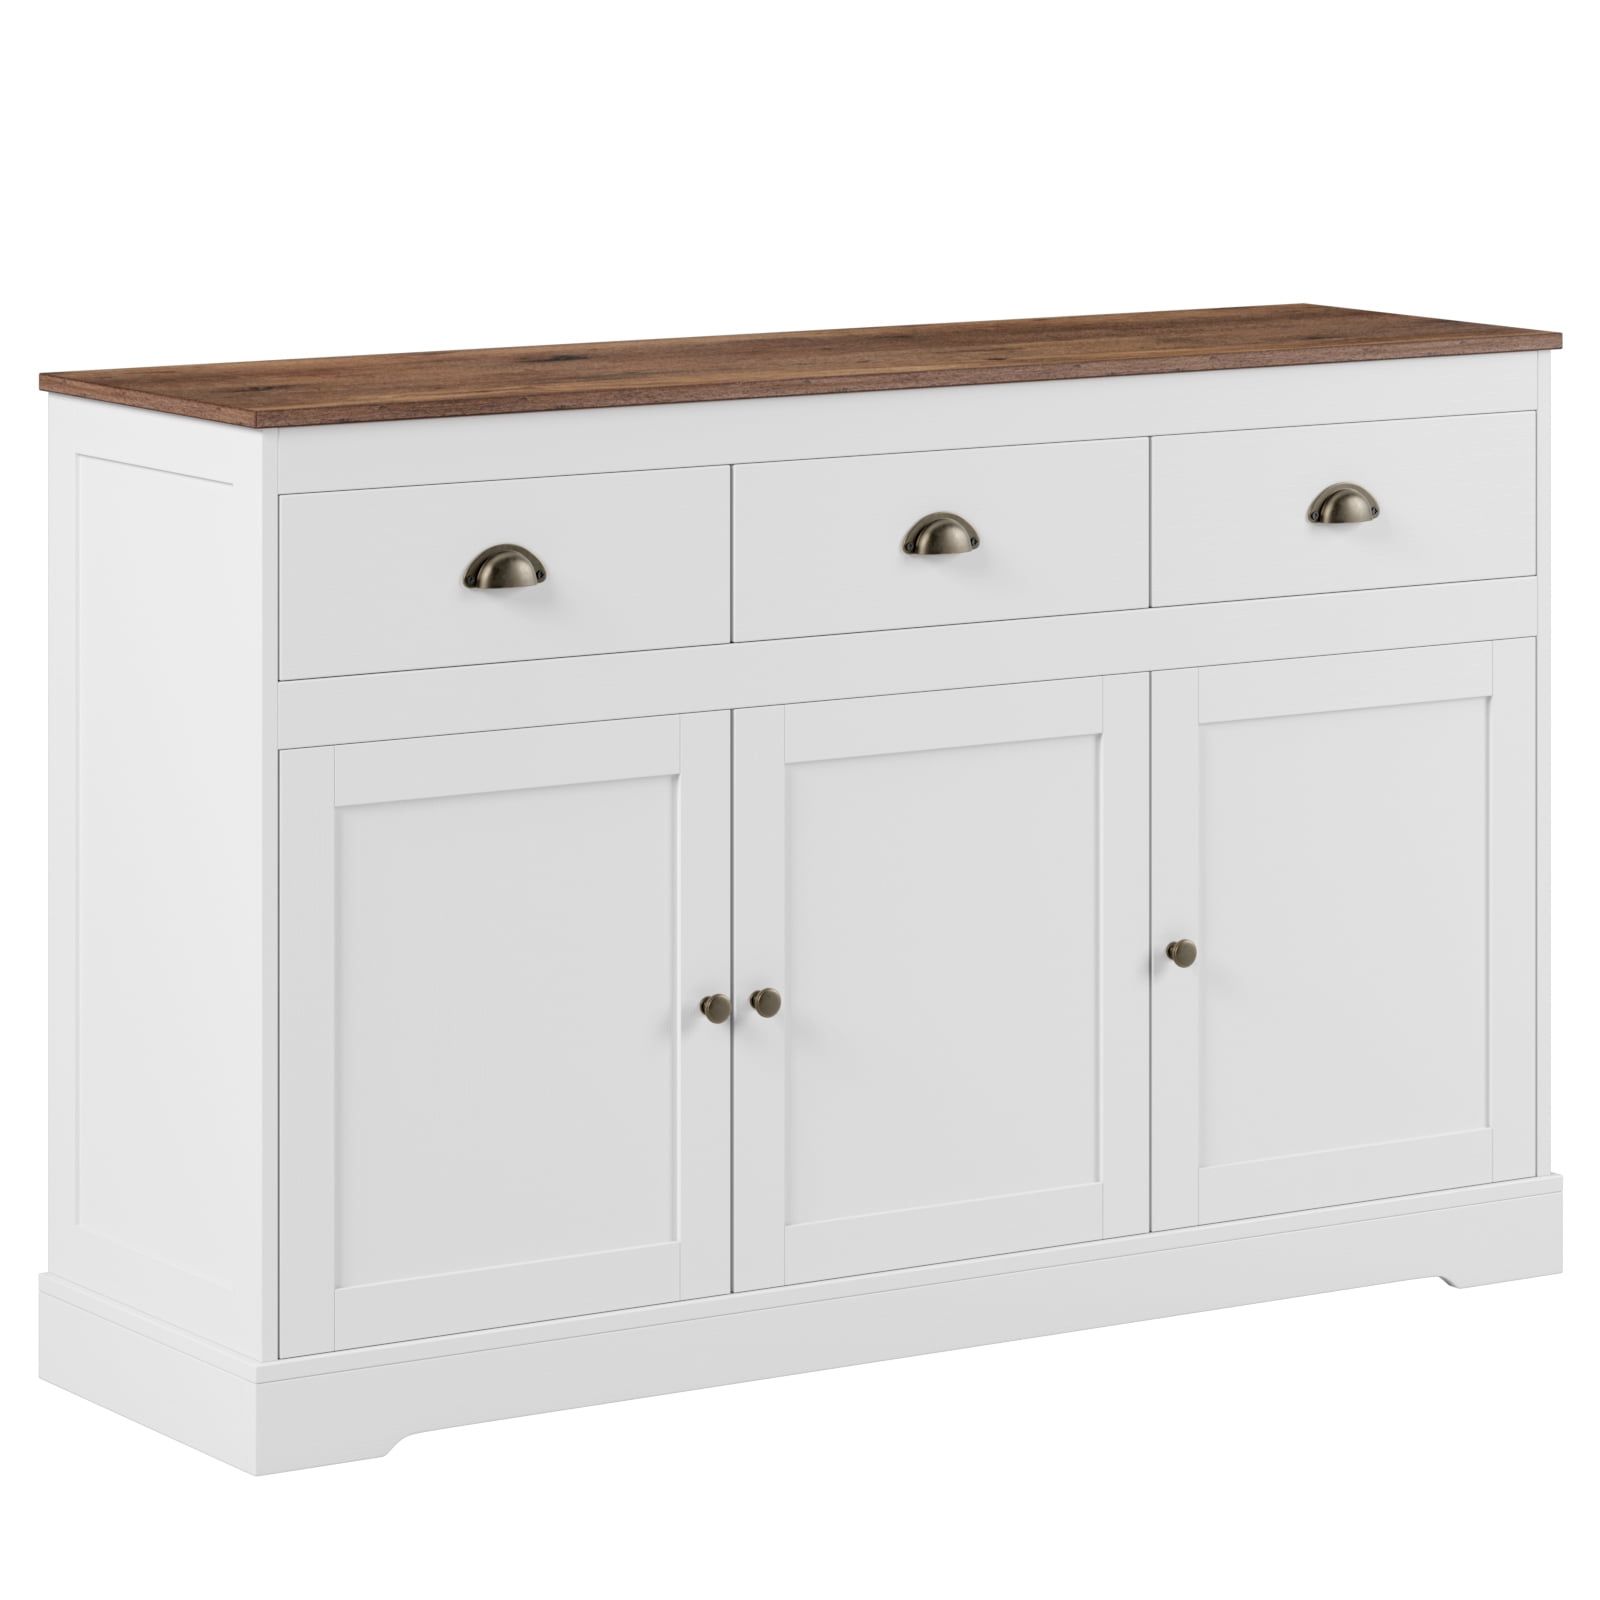 Homfa Sideboard Storage Cabinet With 3 Drawers & 3 Doors, 53.54'' Wide Buffet  Cabinet For Dining Room, White – Walmart In 3 Drawers Sideboards Storage Cabinet (Photo 11 of 15)